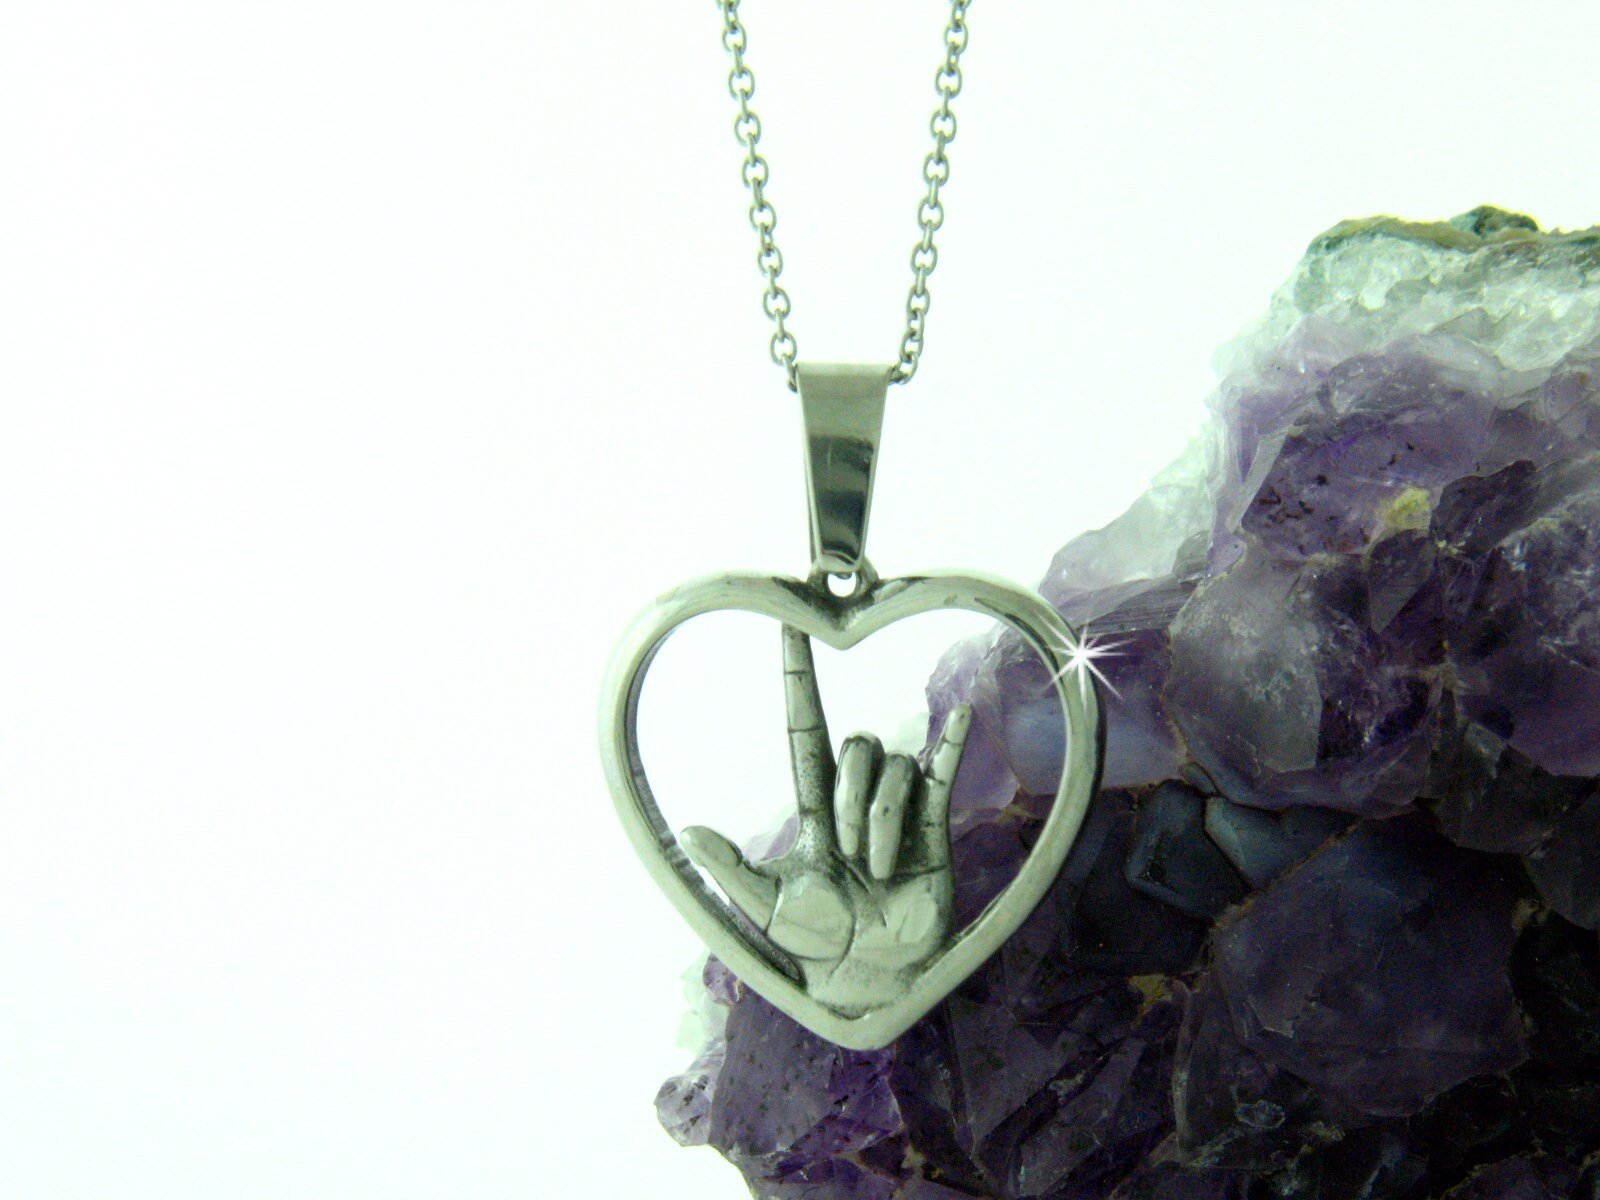 I Love You American Sign Language Silver Necklace